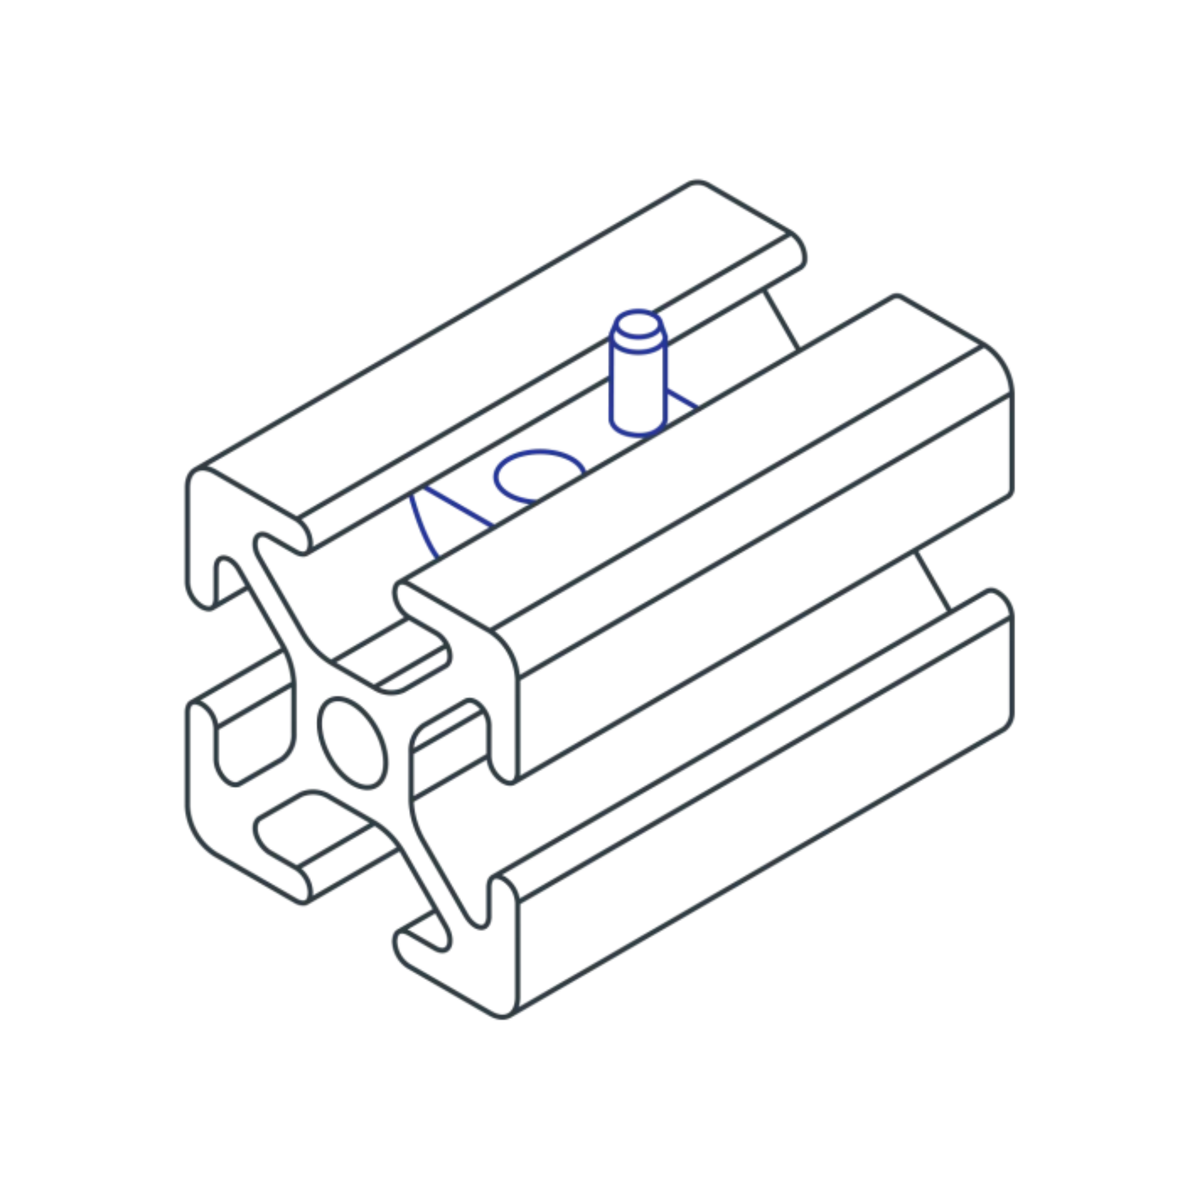 diagram of a t-nut being inserted into a t-slot bar